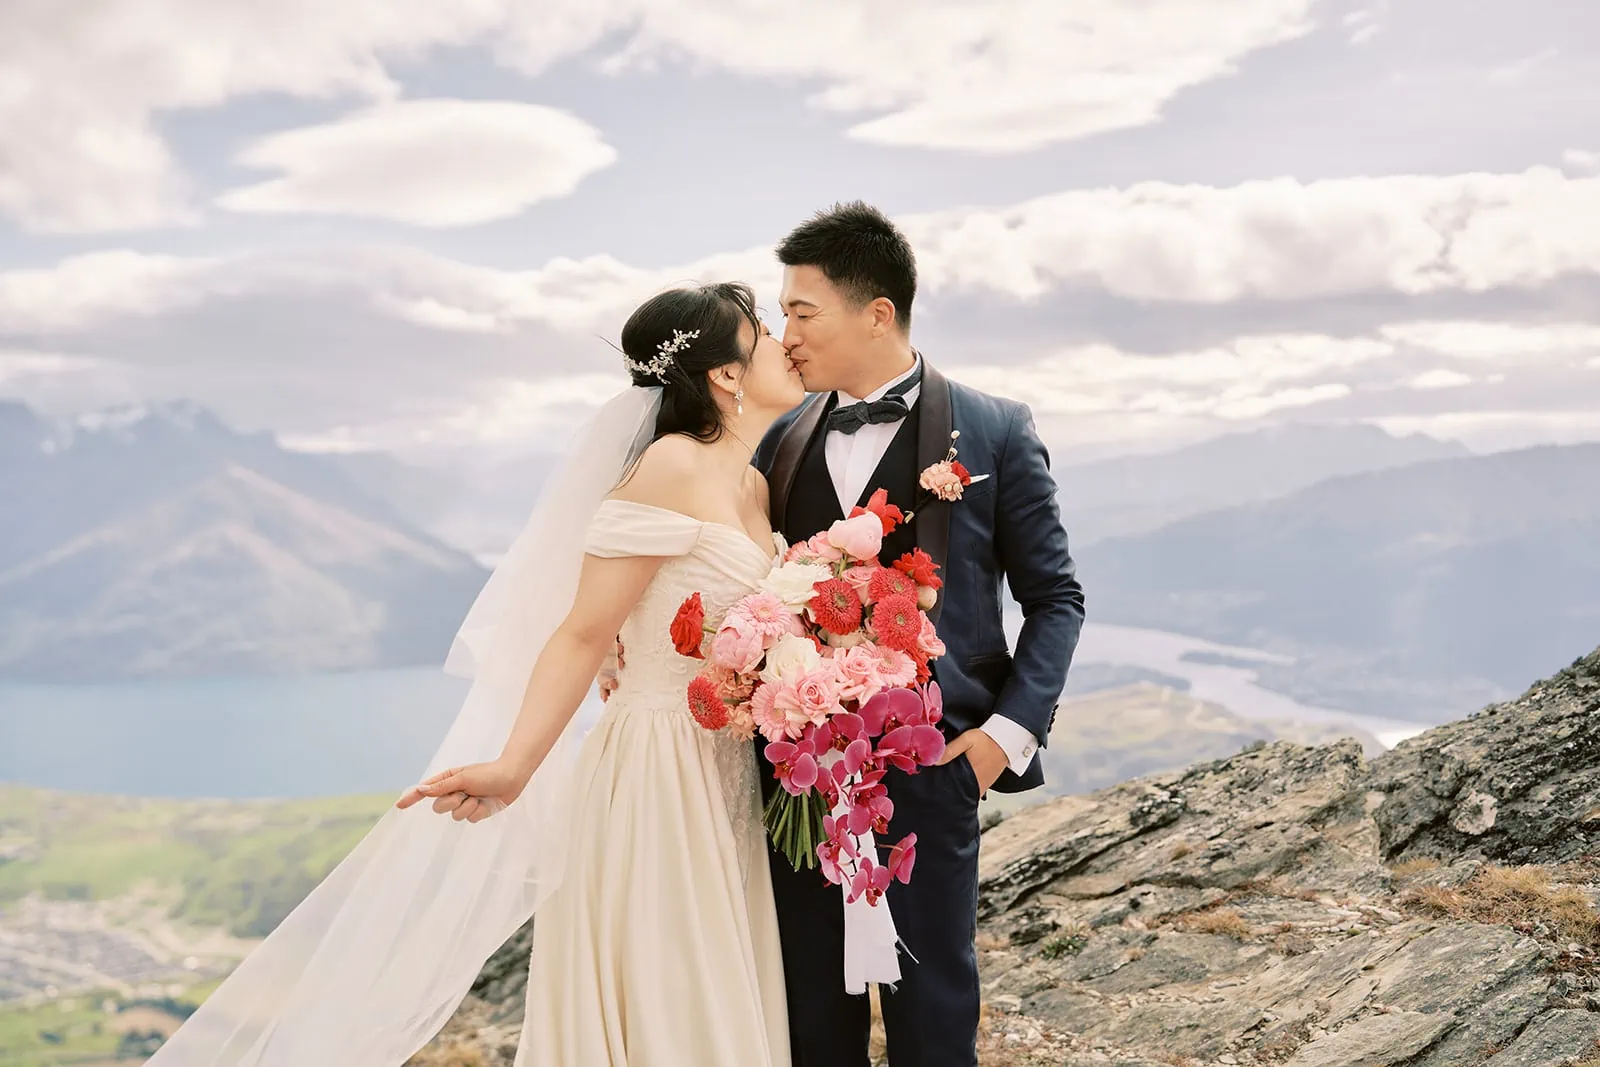 Queenstown Elopement Heli Wedding Photographer クイーンズタウン結婚式 | A romantic pre-wedding photoshoot capturing a bride and groom kissing on top of a mountain in Queenstown, New Zealand.